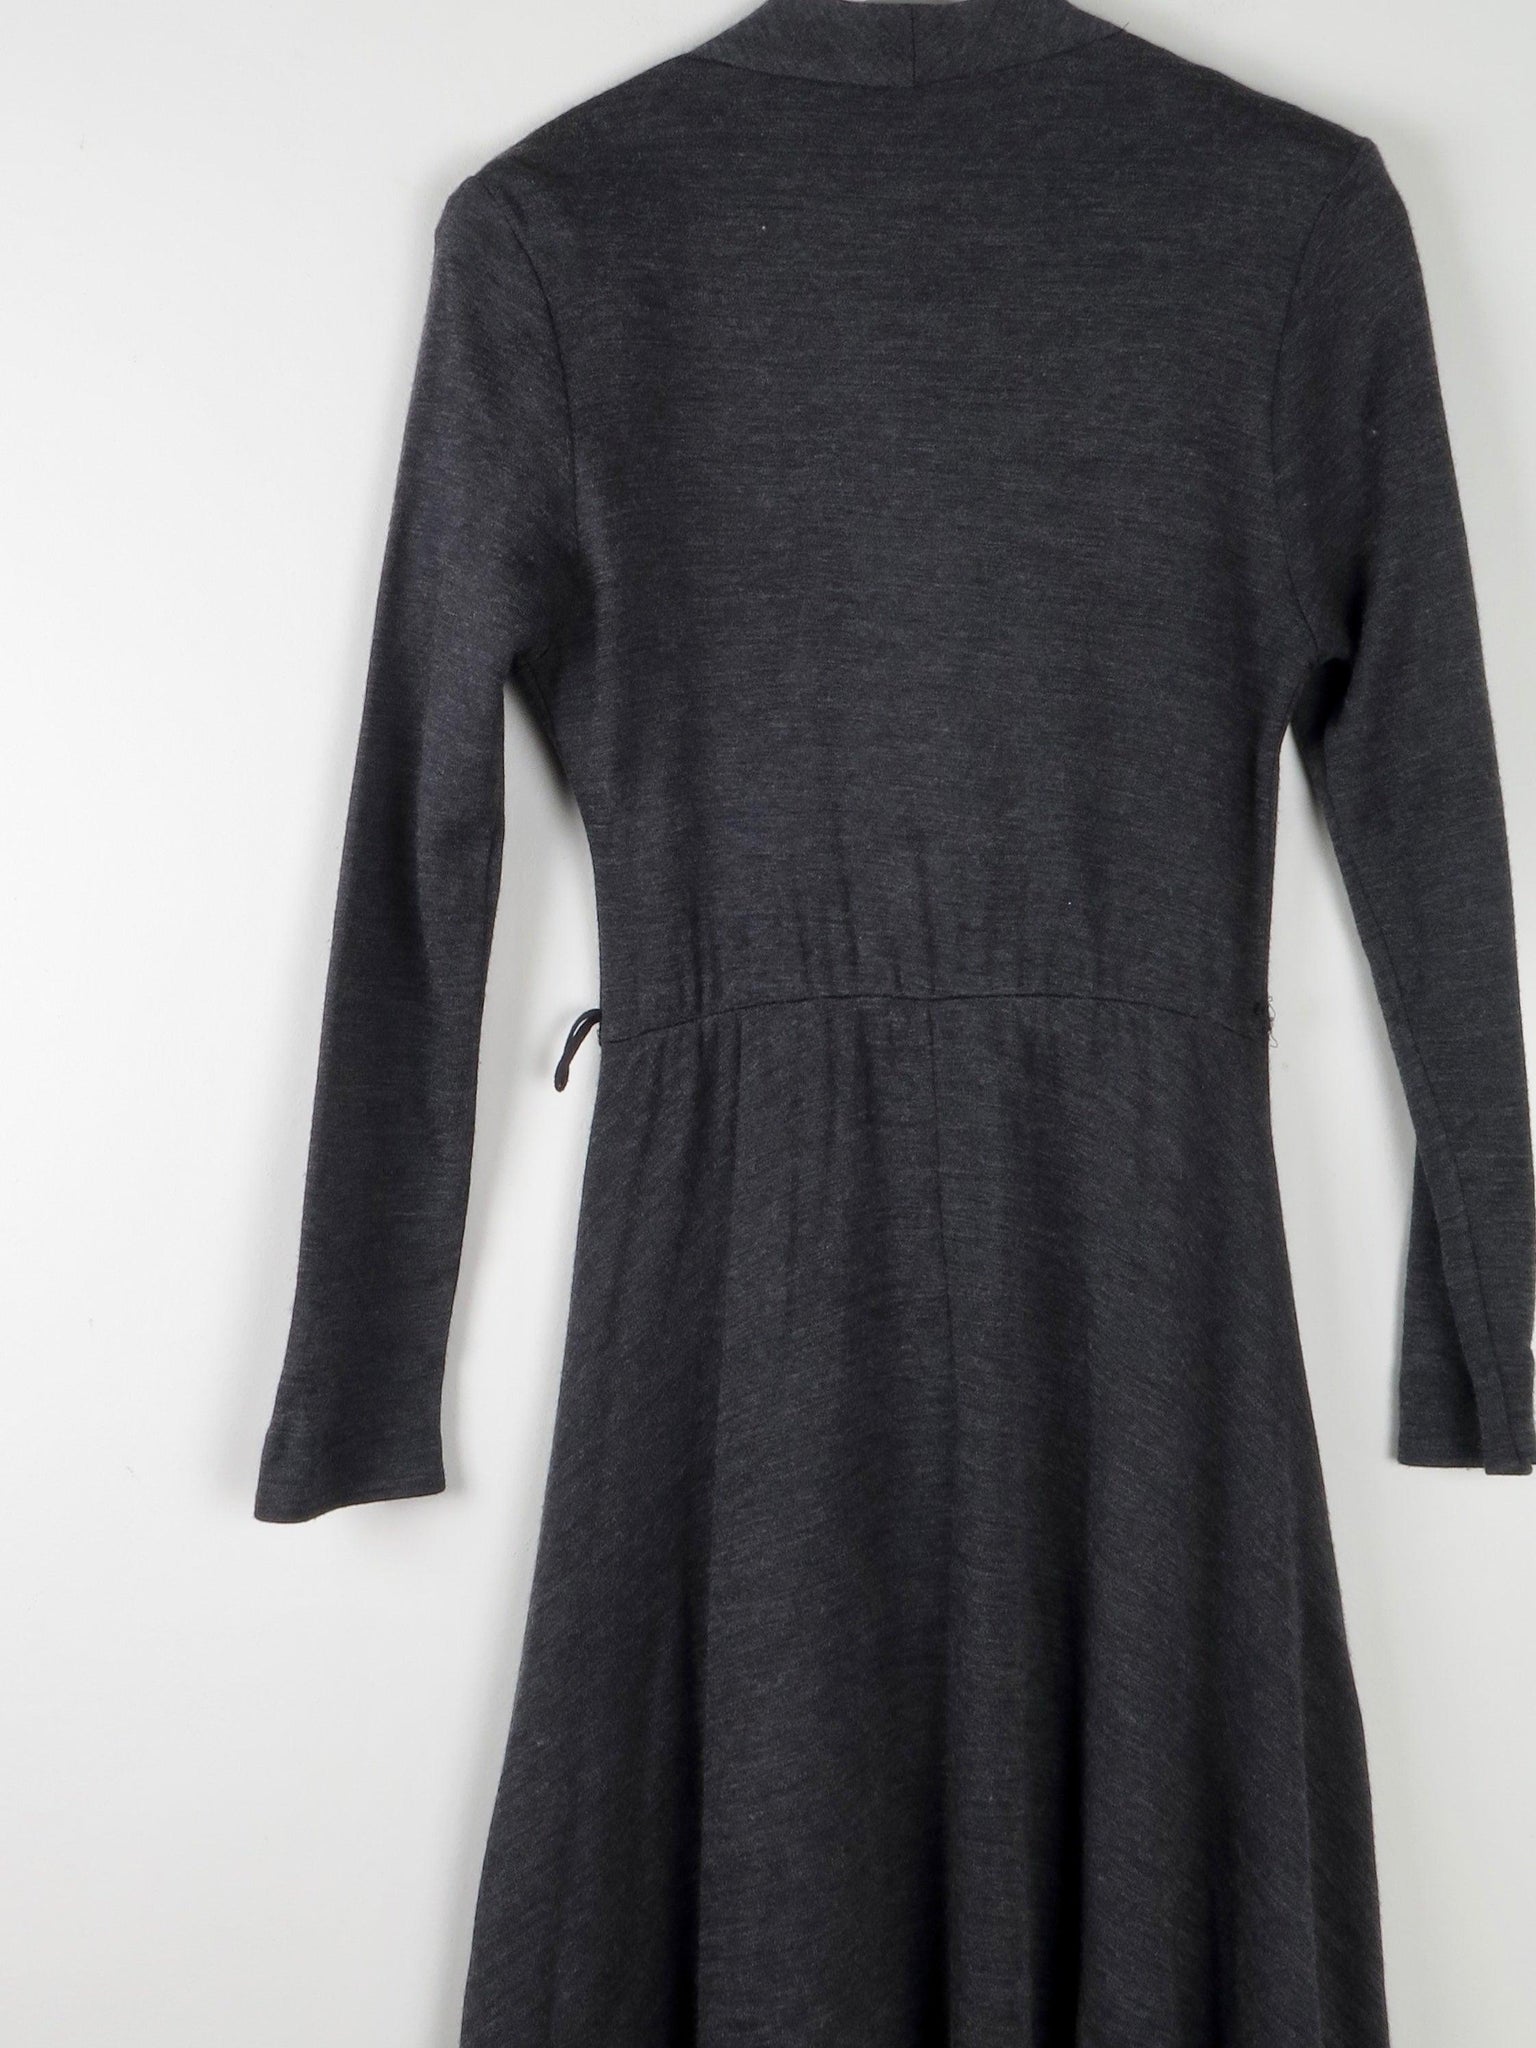 Vintage Charcoal Grey Dress Wrap Over Style S